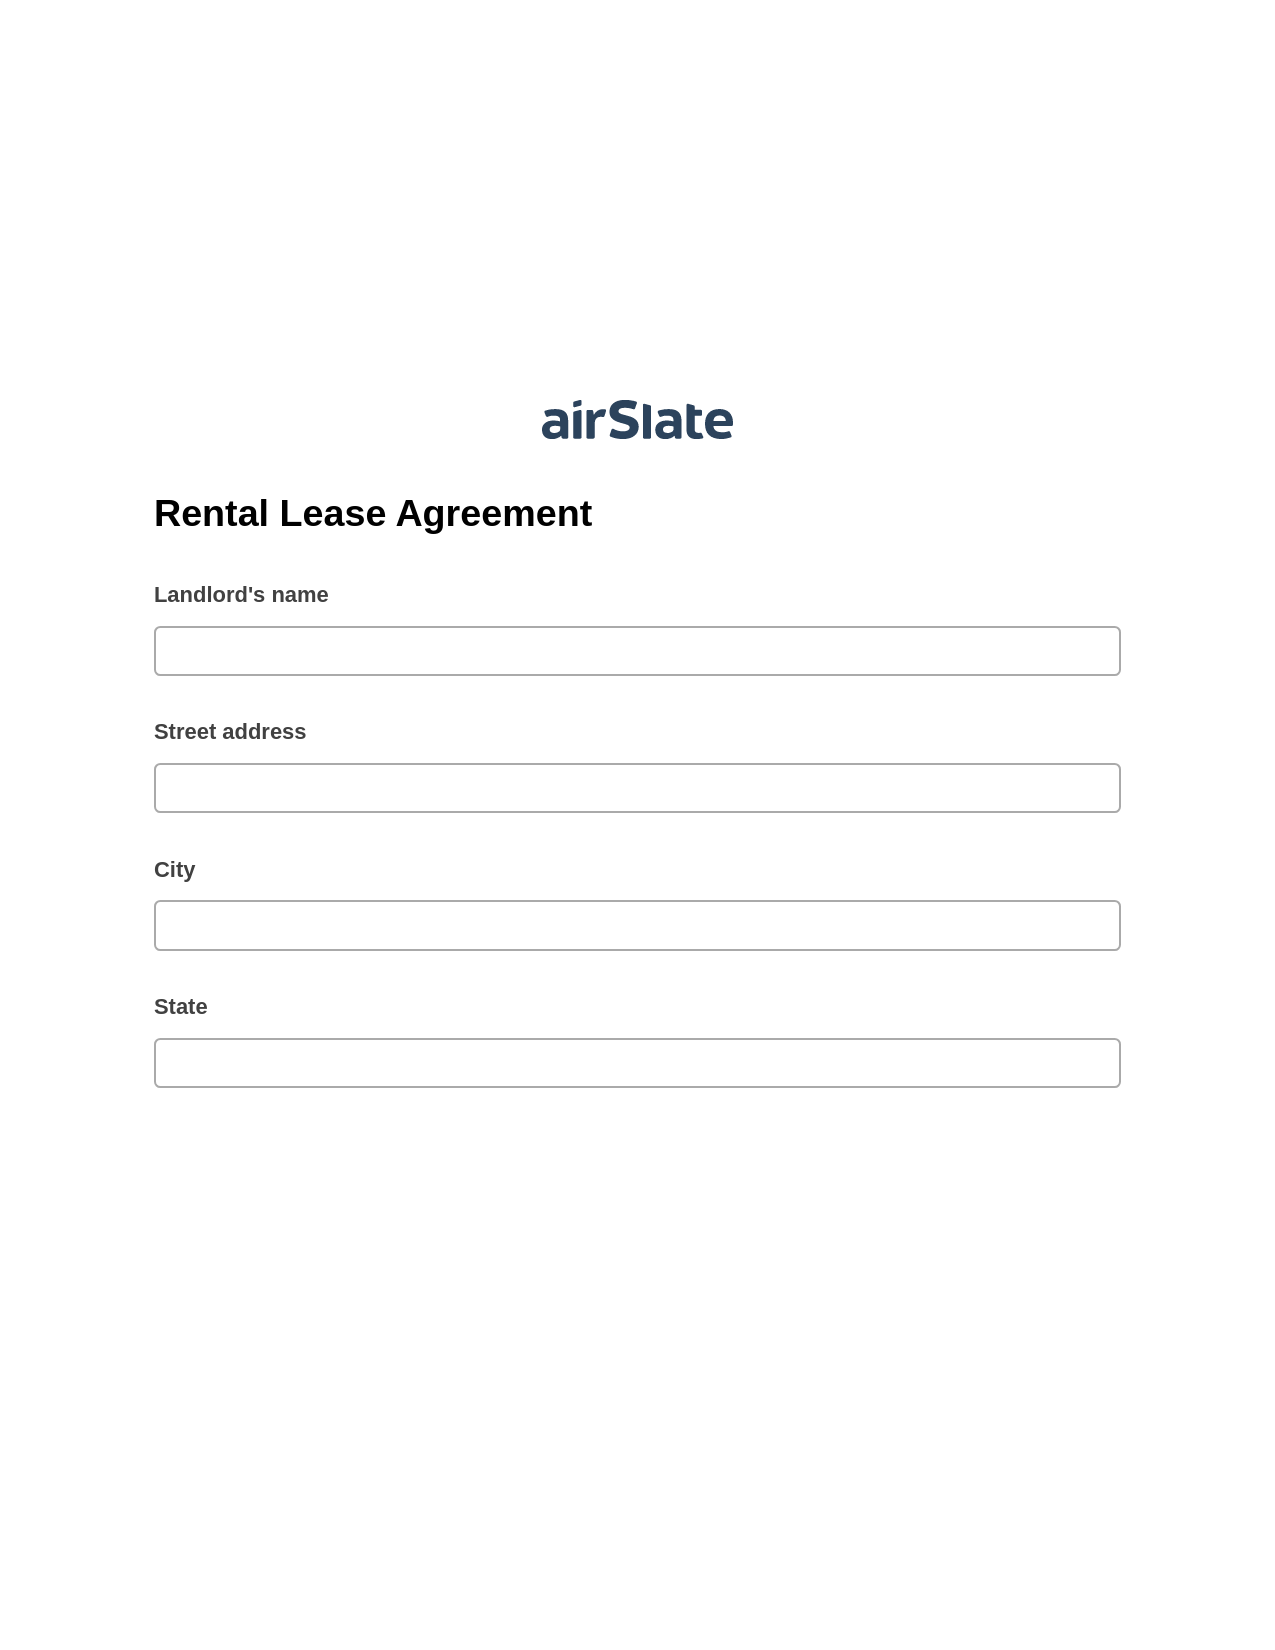 Rental Lease Agreement Pre-fill from MySQL Bot, Audit Trail Bot, Export to Excel 365 Bot